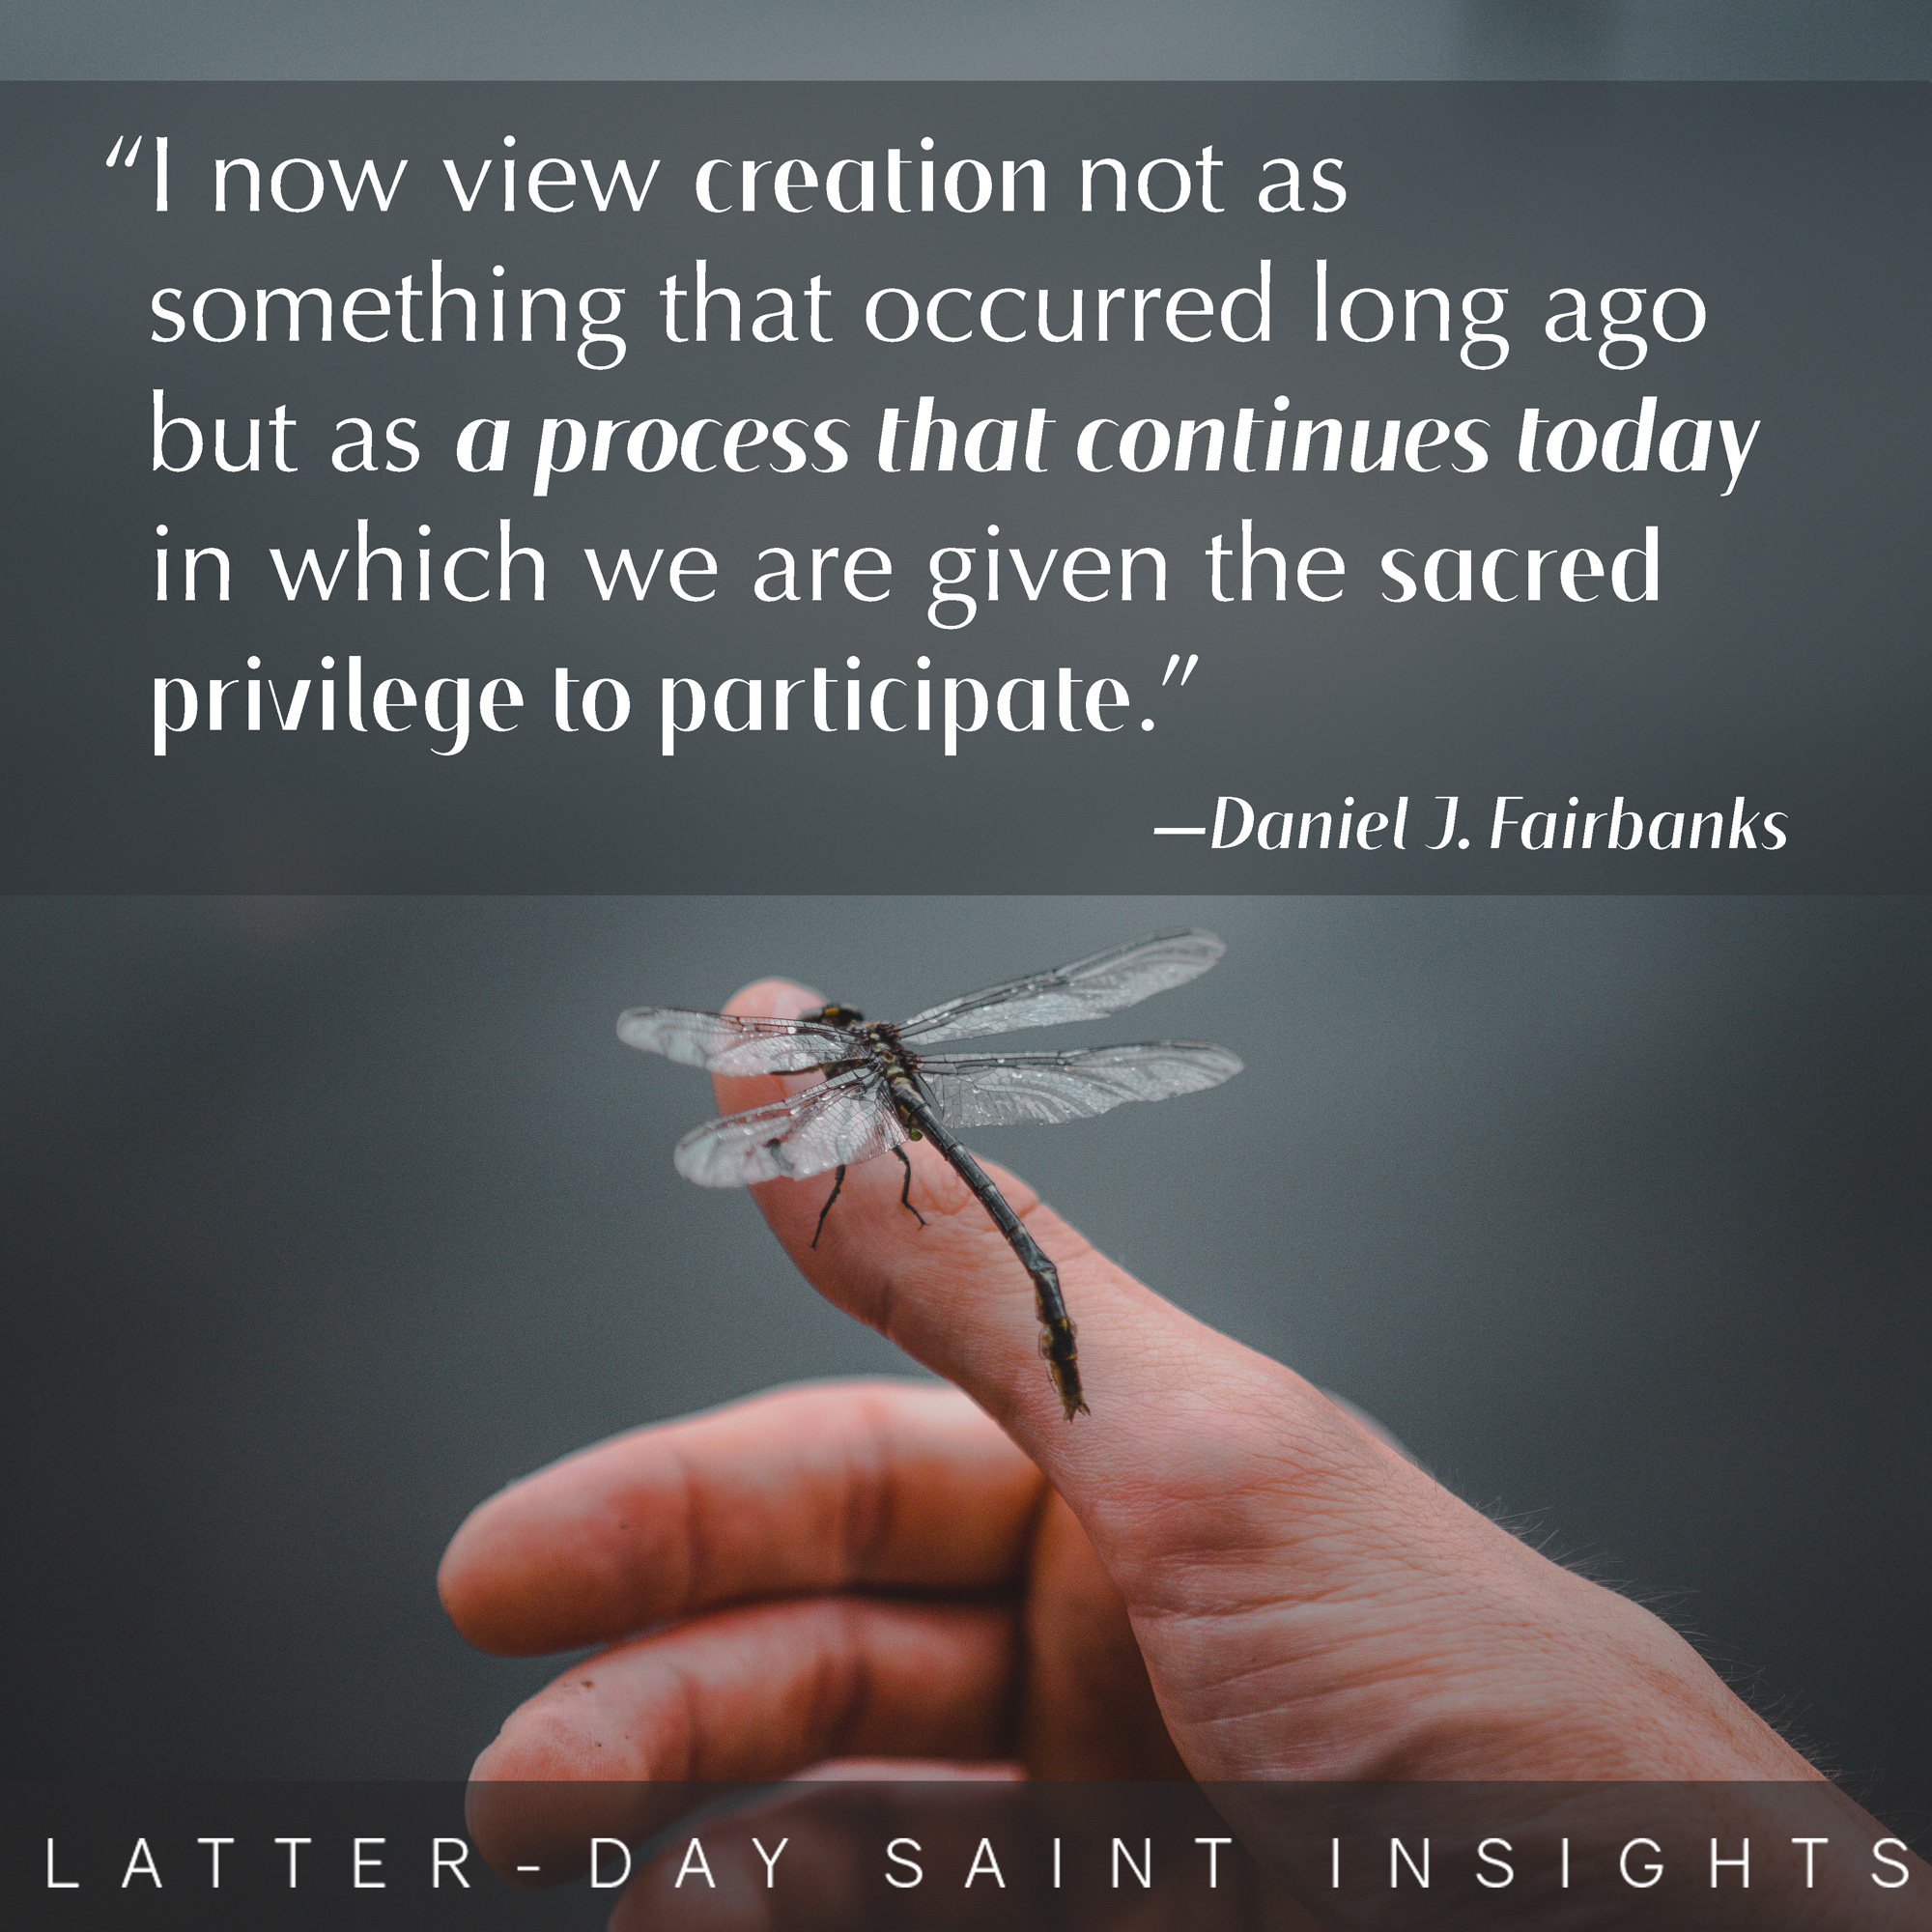 I now view creation not as something that occurred long ago but as a process that continues today in which we are given the sacred privilege to participate. –Daniel J. Fairbanks